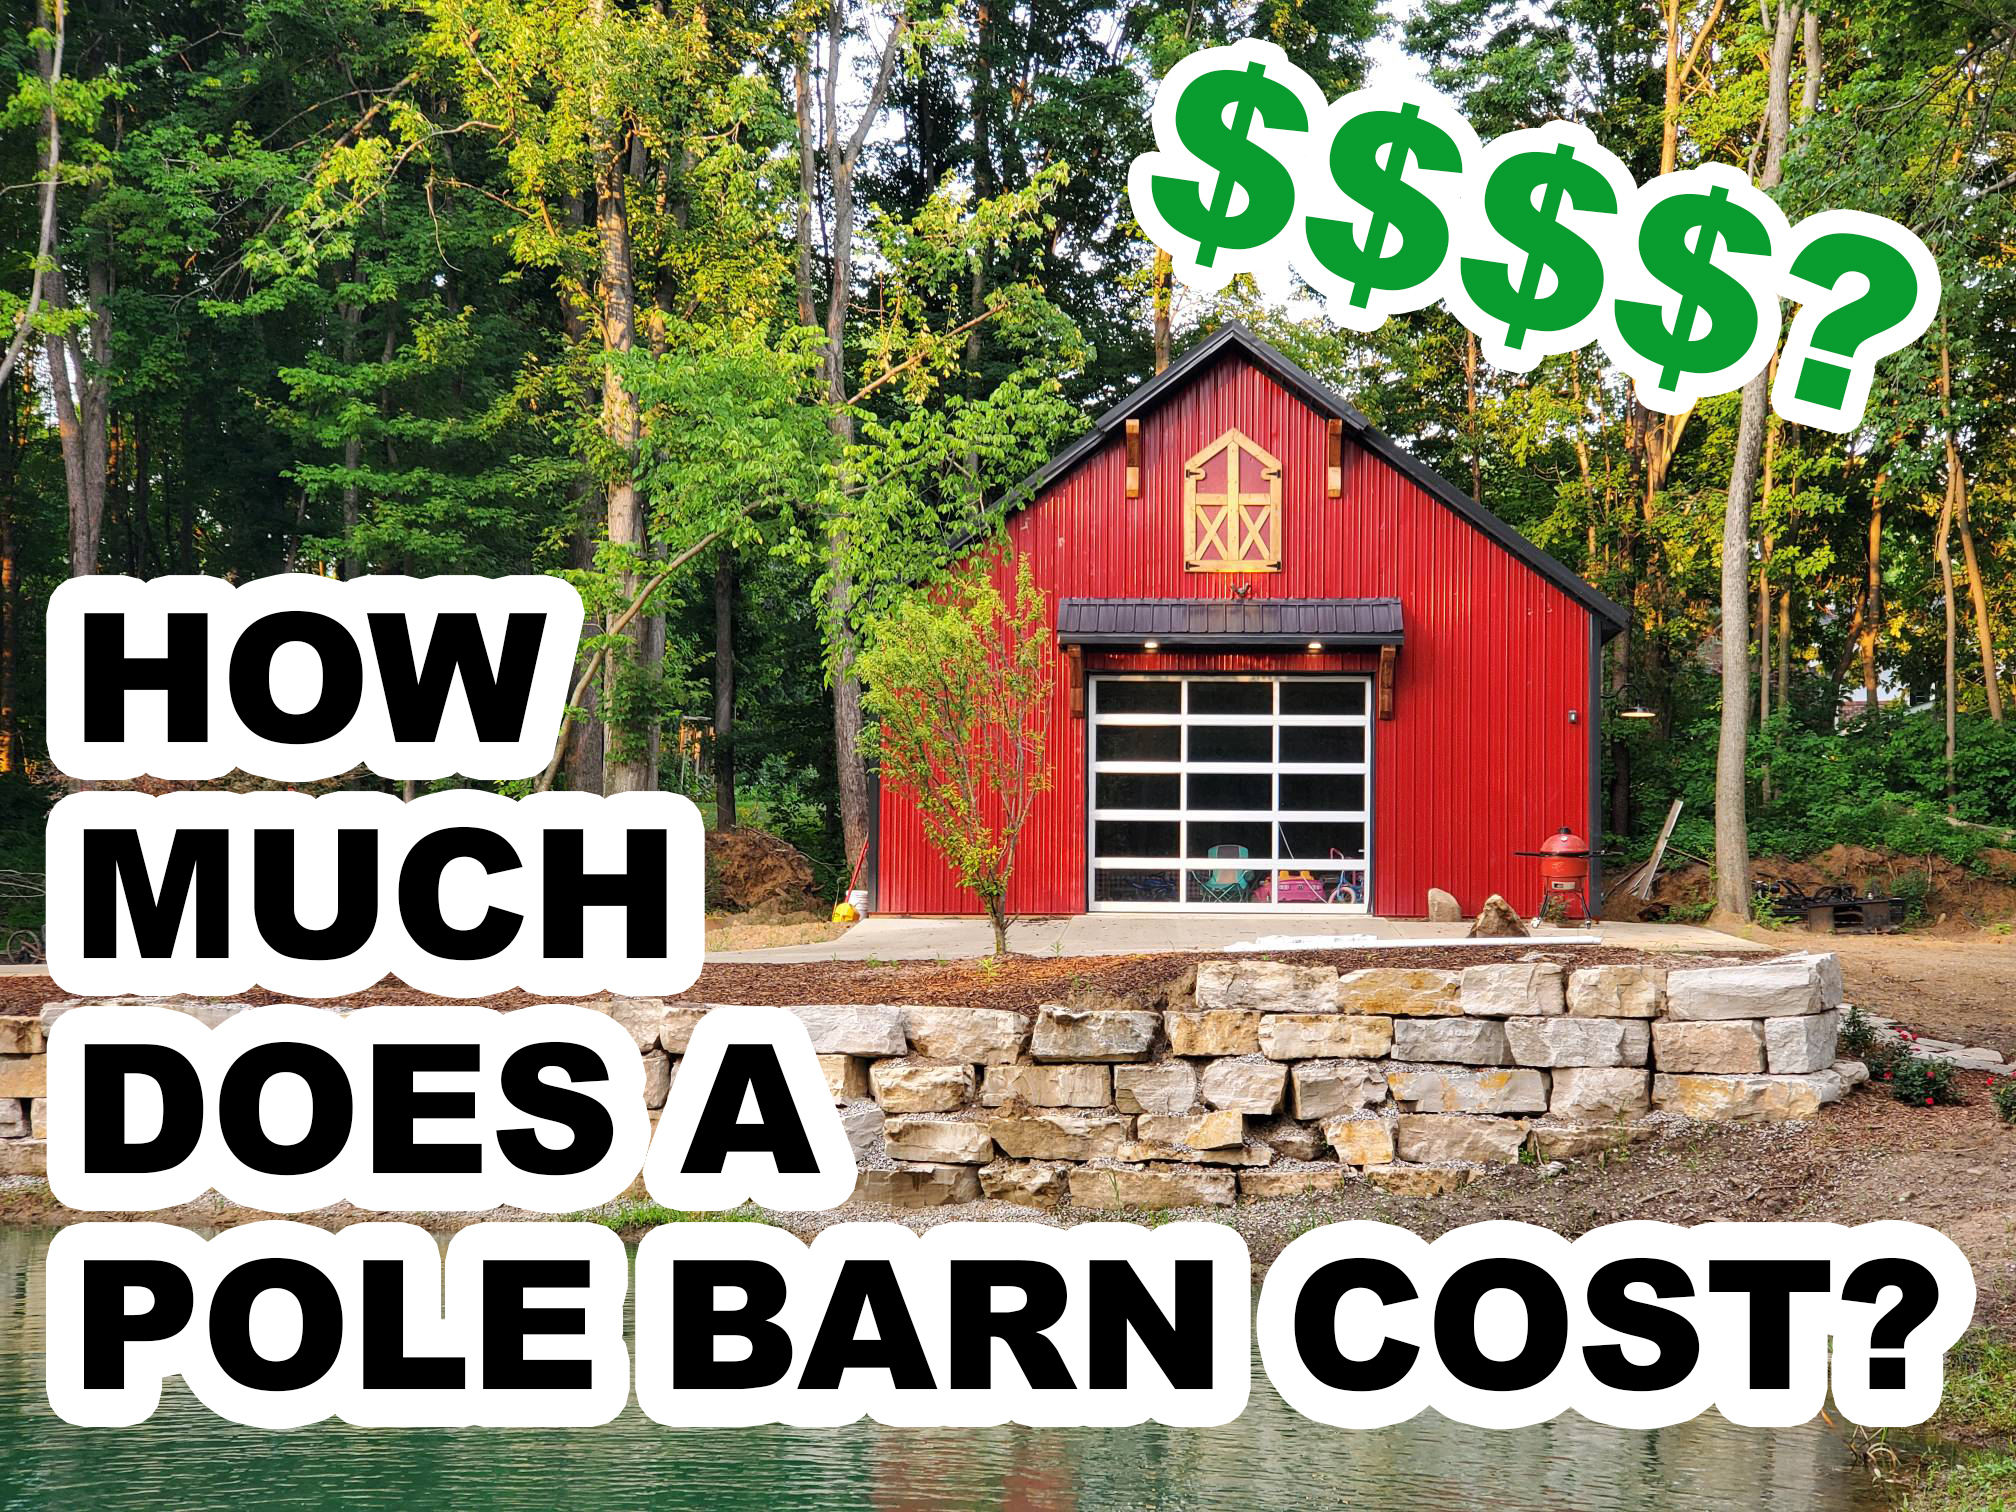 How Much Does A Pole Barn Cost? - Image